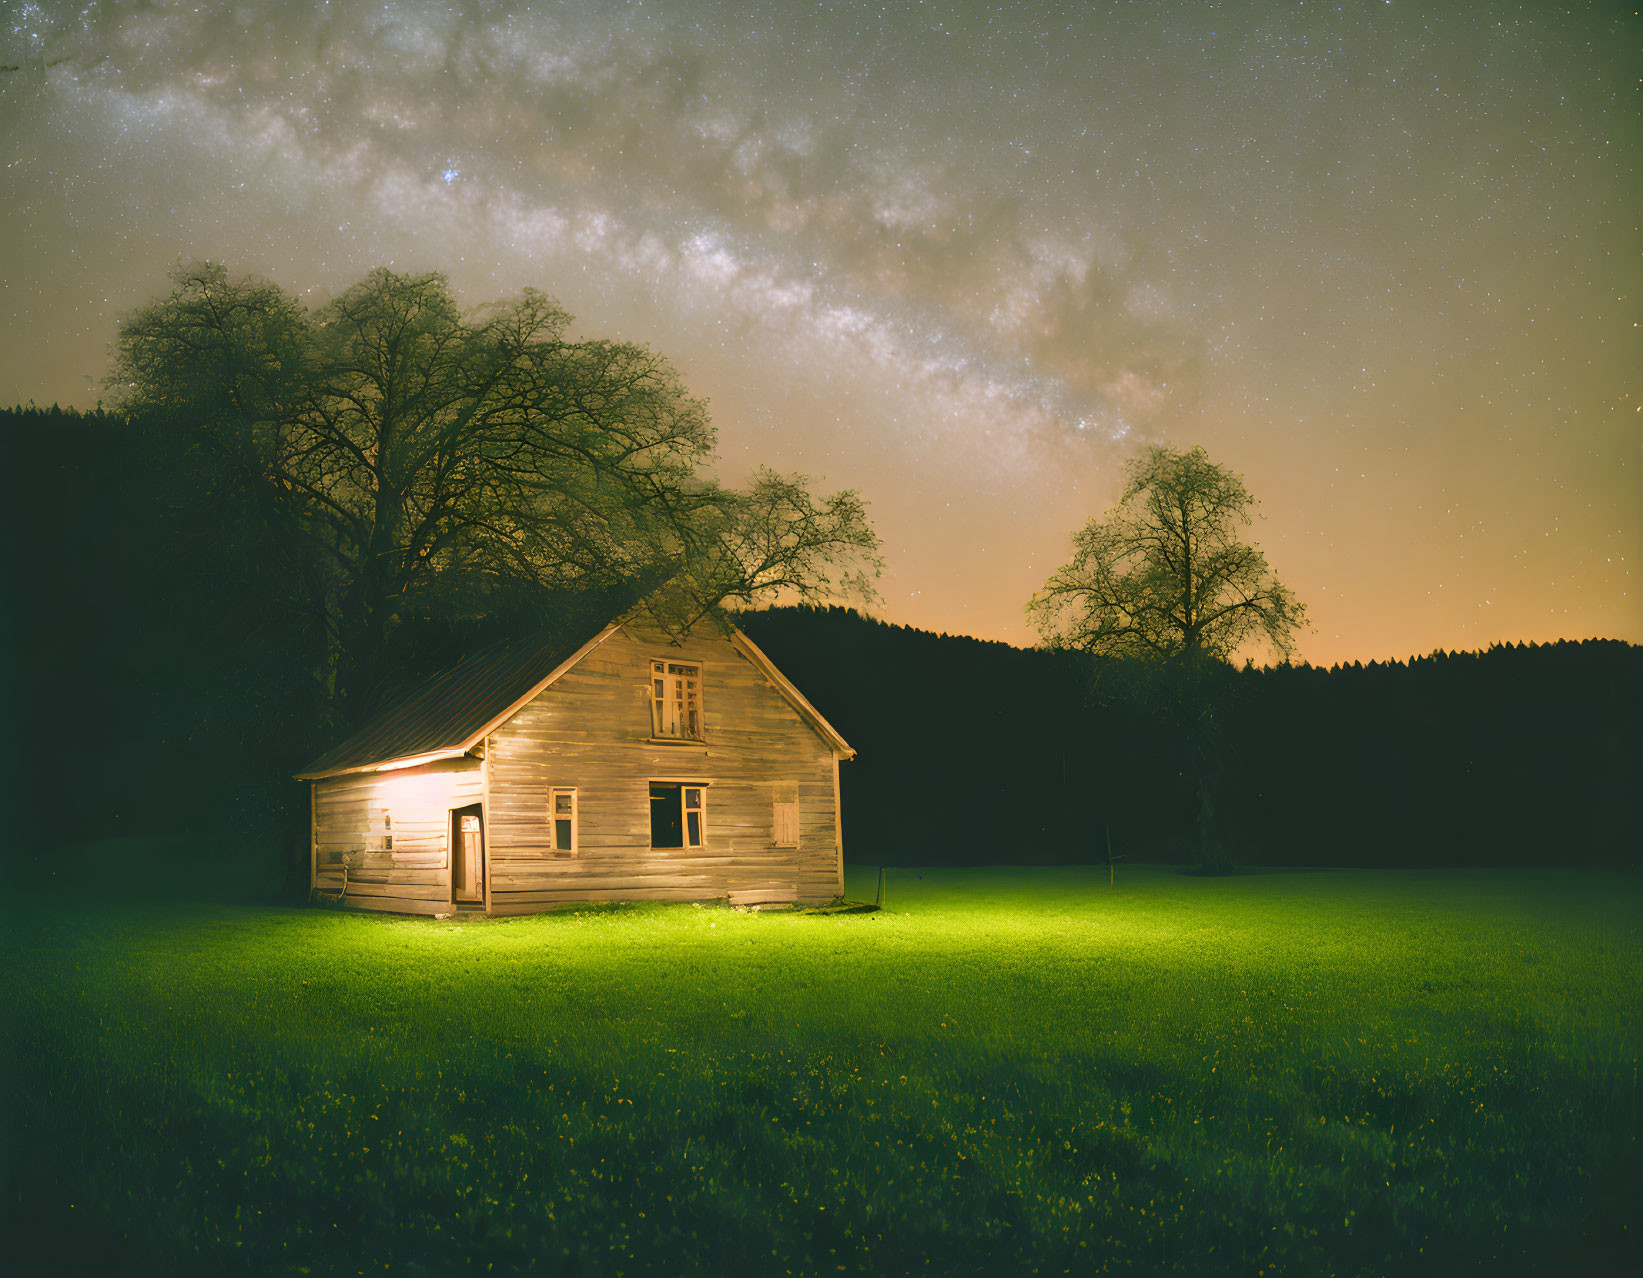 Wooden house under starry sky with Milky Way, forest landscape